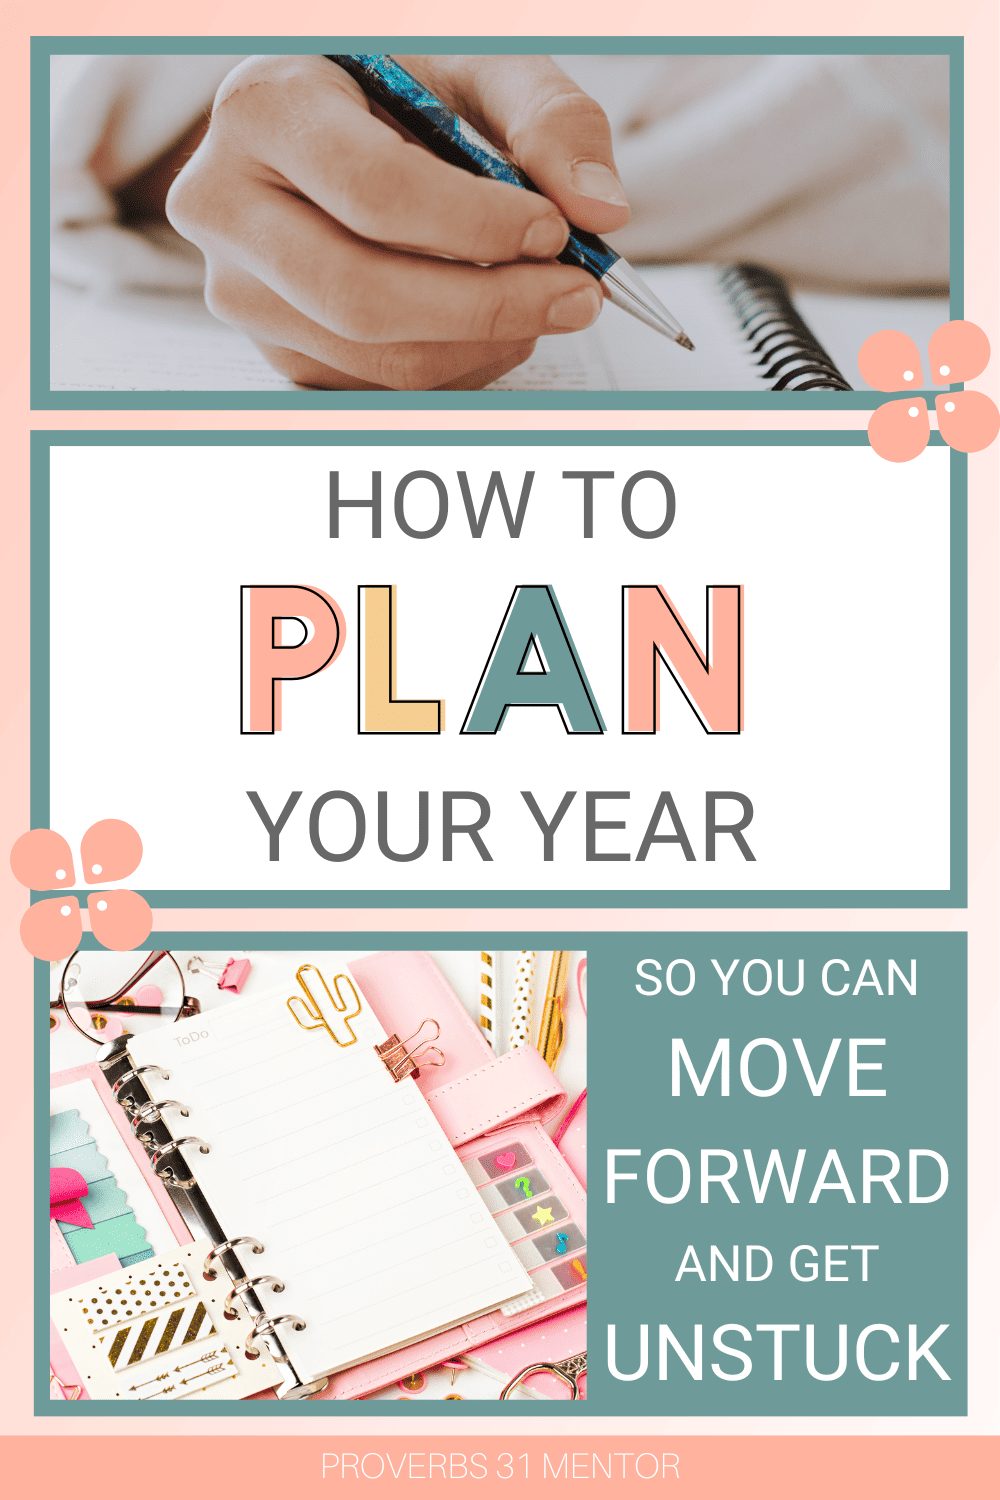 Title: How to Plan Your Year So You Can Move Forward and Get Unstuck Picture- Planner and woman writing in planner